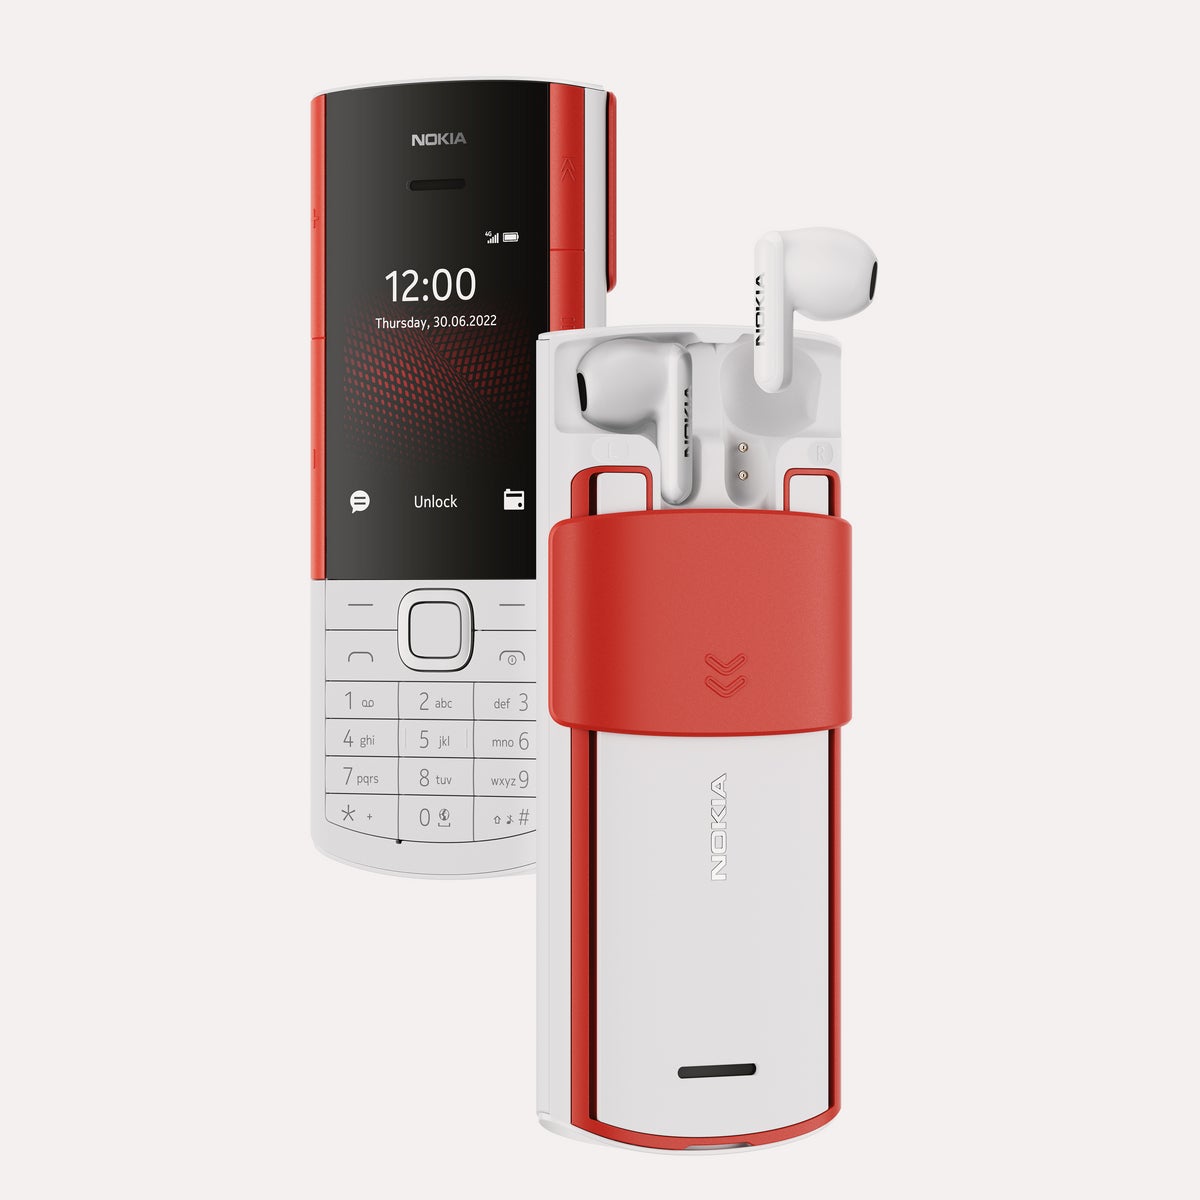 Nokia 5710 XpressAudio - Nokia brings back the retro charm with three feature phones, Android tablet